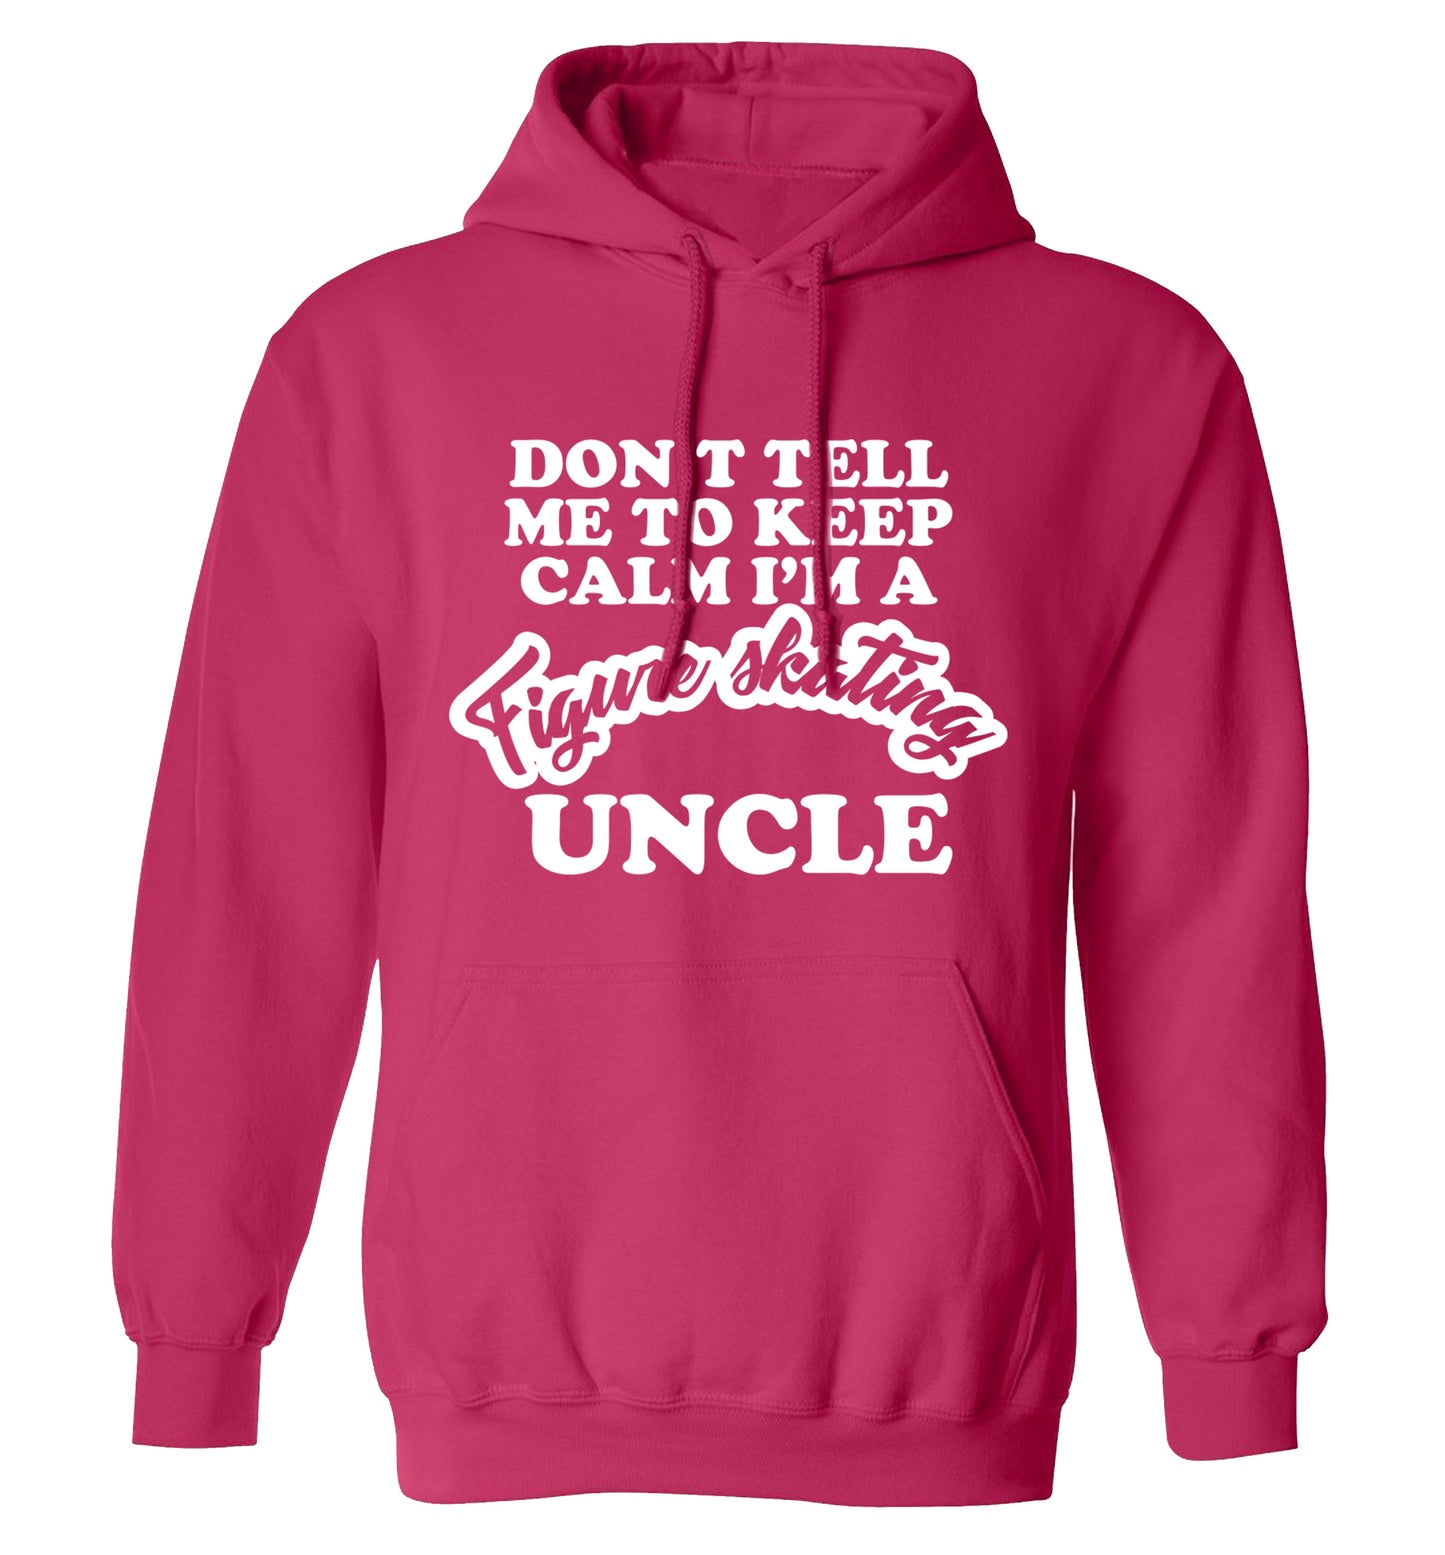 Don't tell me to keep calm I'm a figure skating uncle adults unisexpink hoodie 2XL